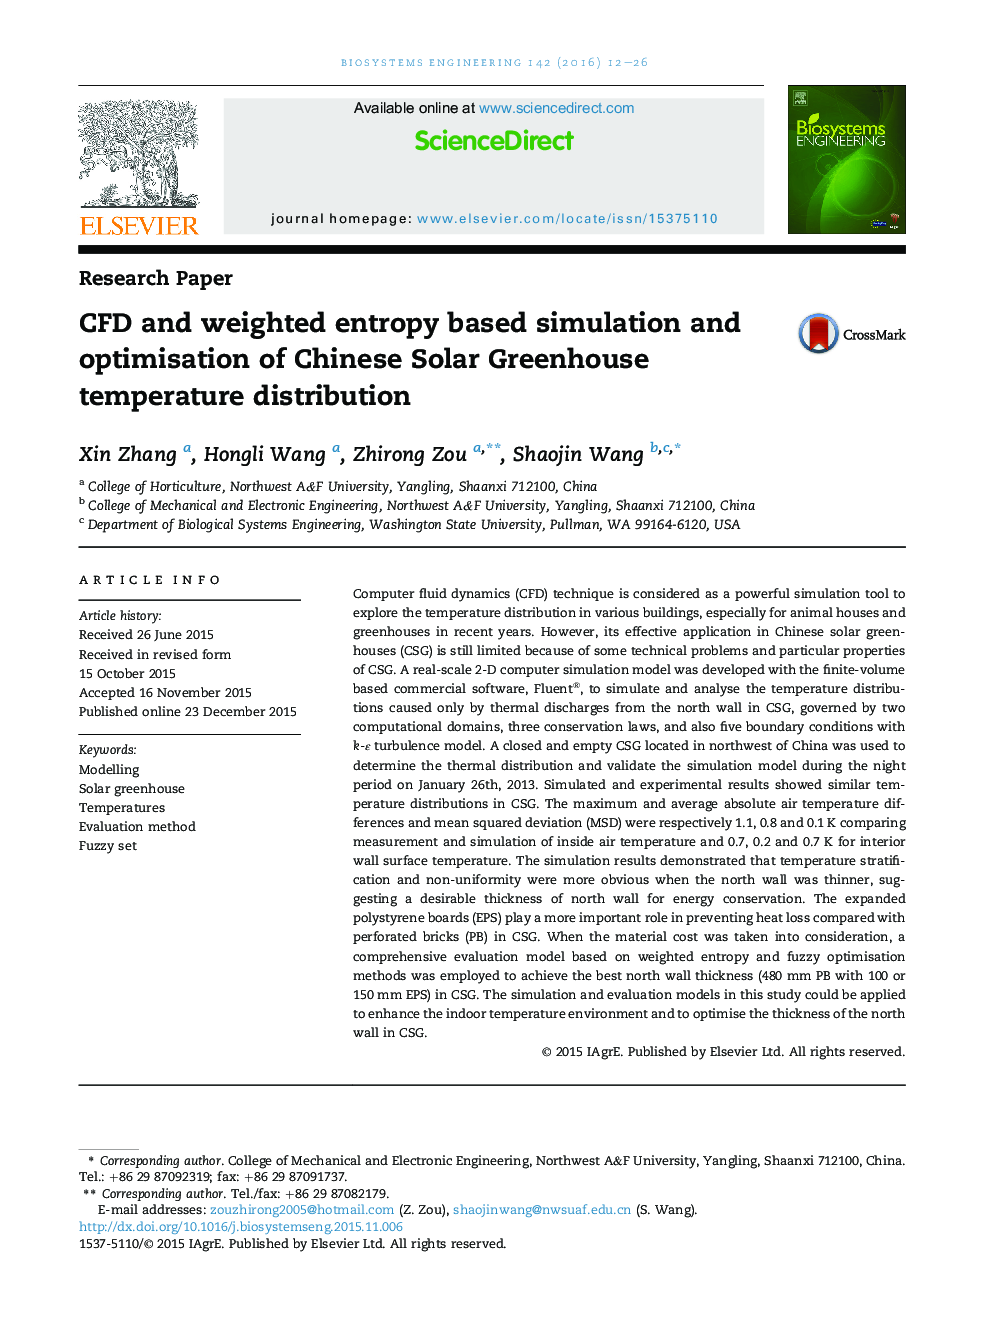 CFD and weighted entropy based simulation and optimisation of Chinese Solar Greenhouse temperature distribution